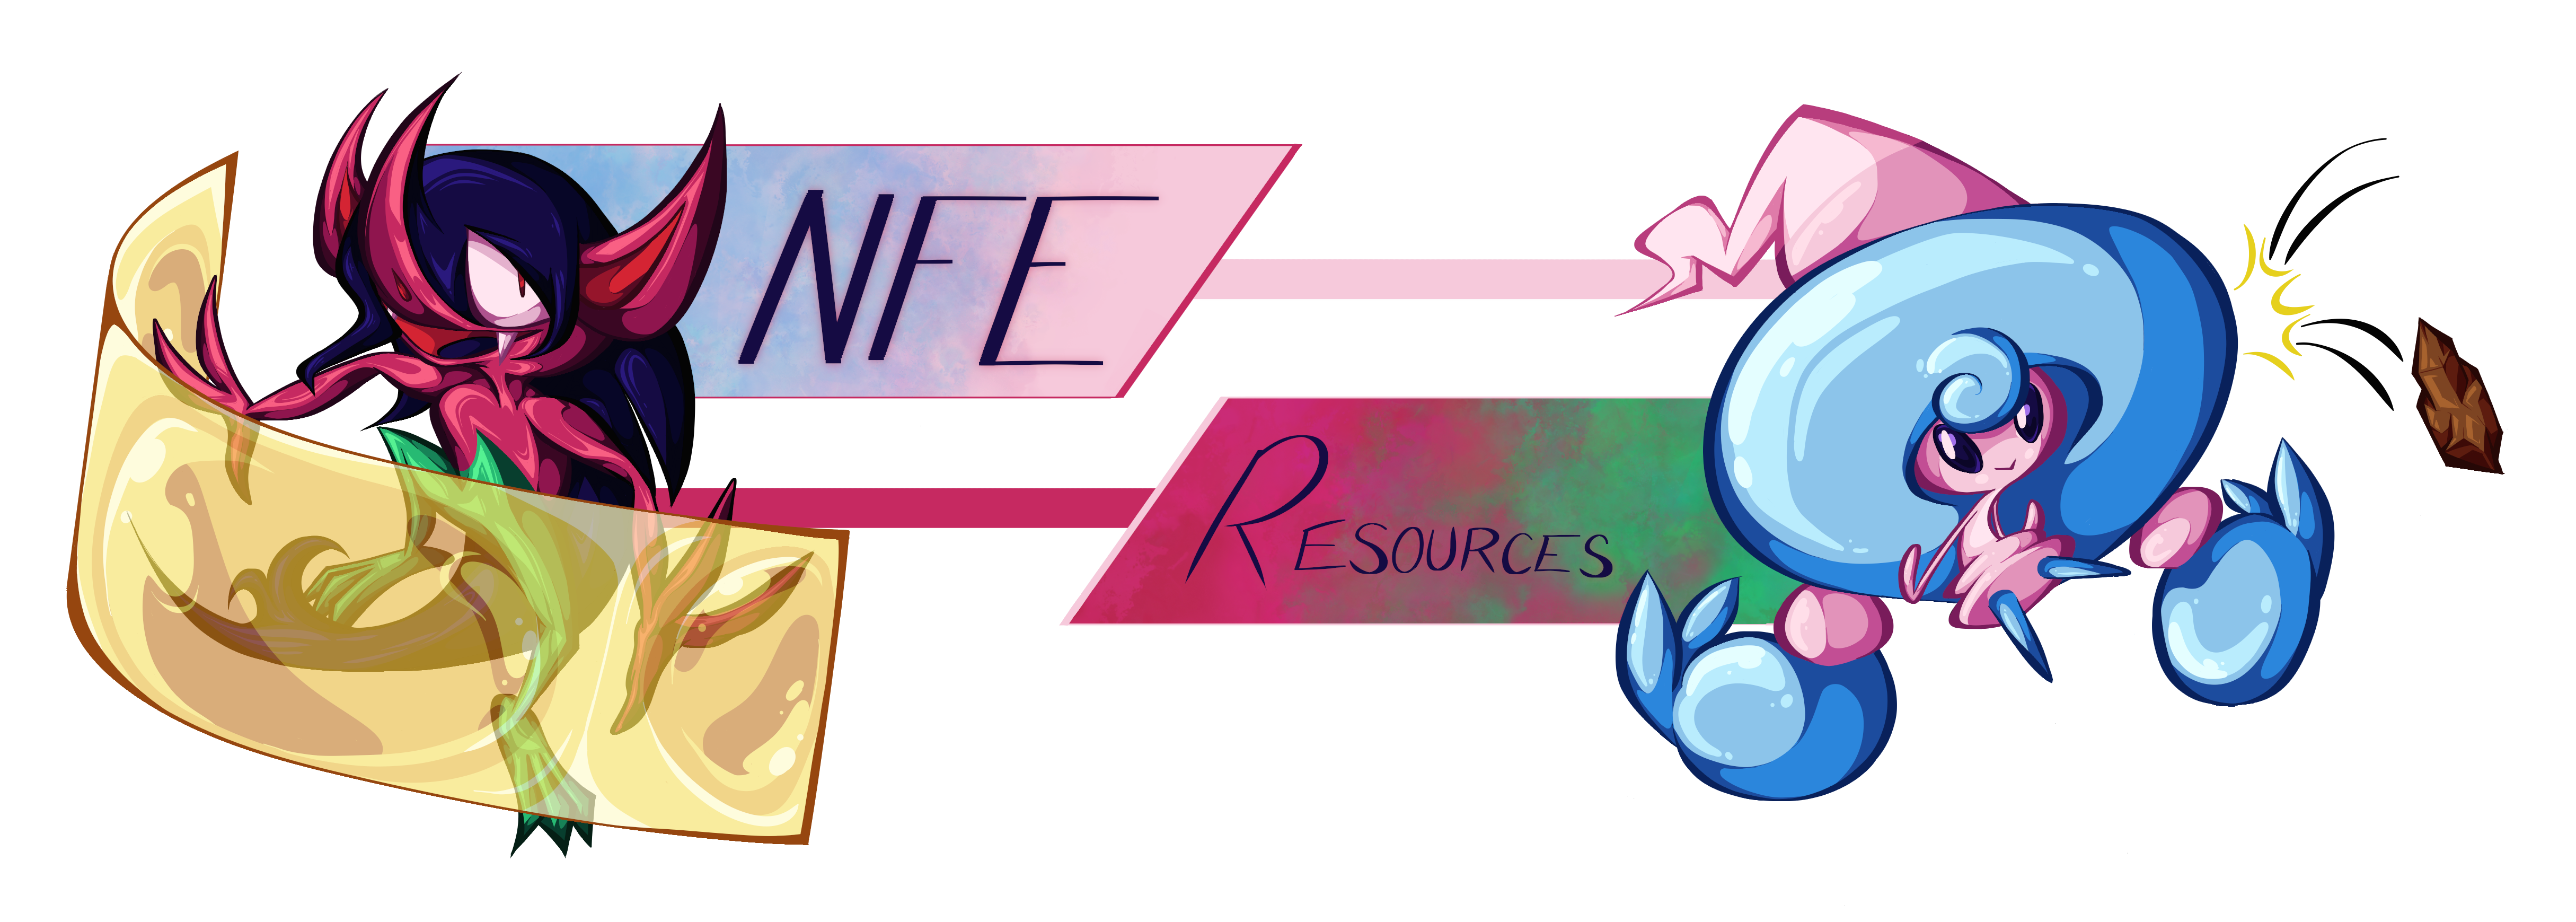 nfe resources.png